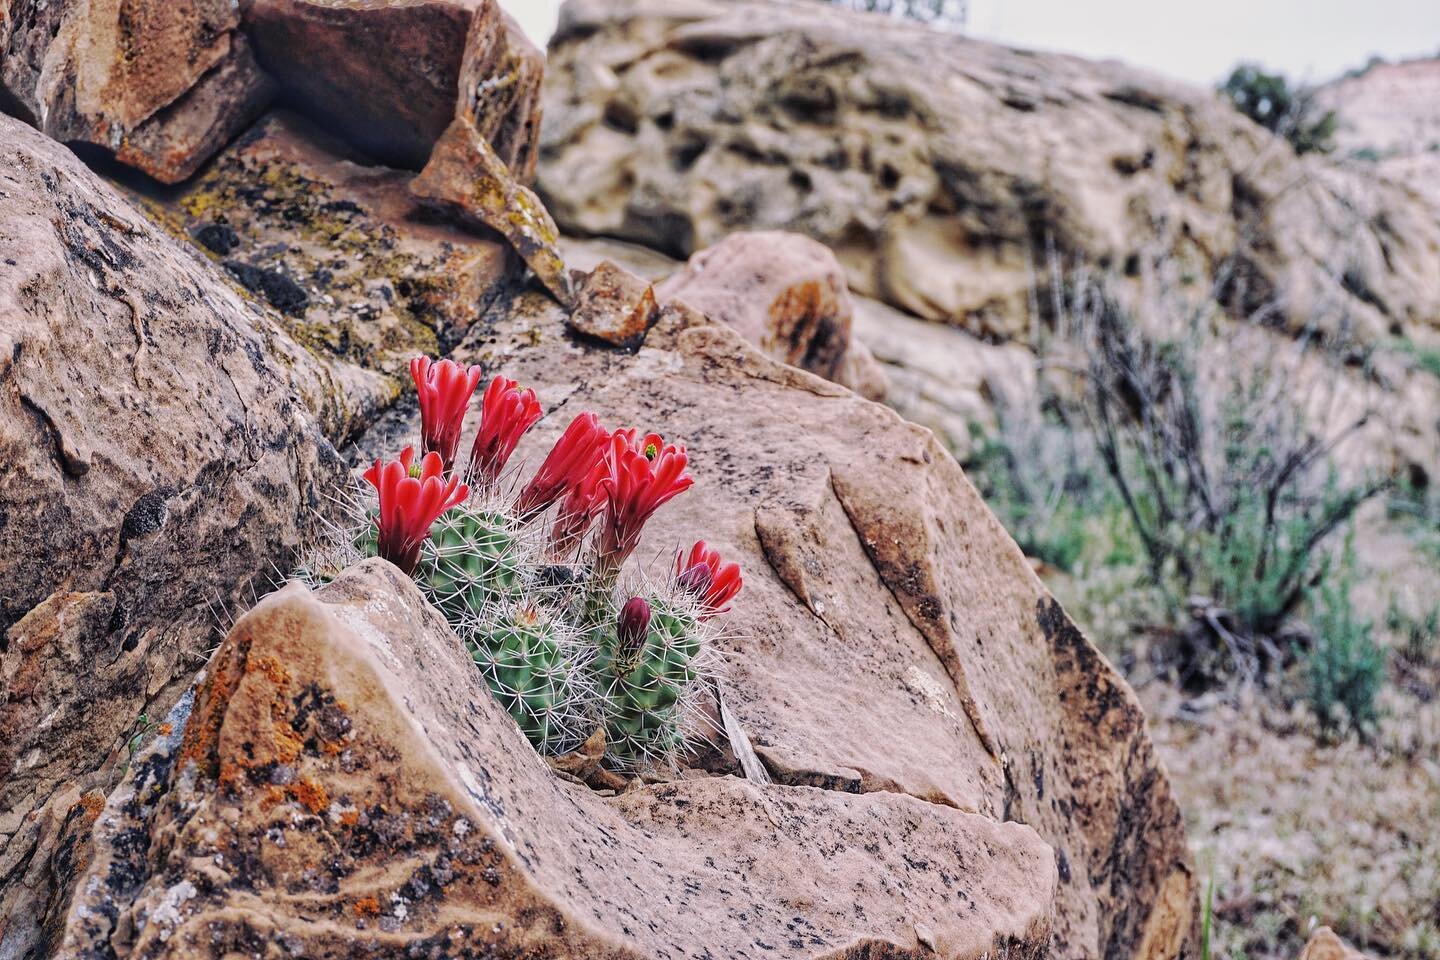 The desert in bloom is the ultimate symbol of resiliency. 
&bull;
It is the most concrete example of life finding a way to flourish despite all odds.
&bull;
It proves that the brutal can also be beautiful. 
&bull;
Whenever I&rsquo;m feeling helpless 